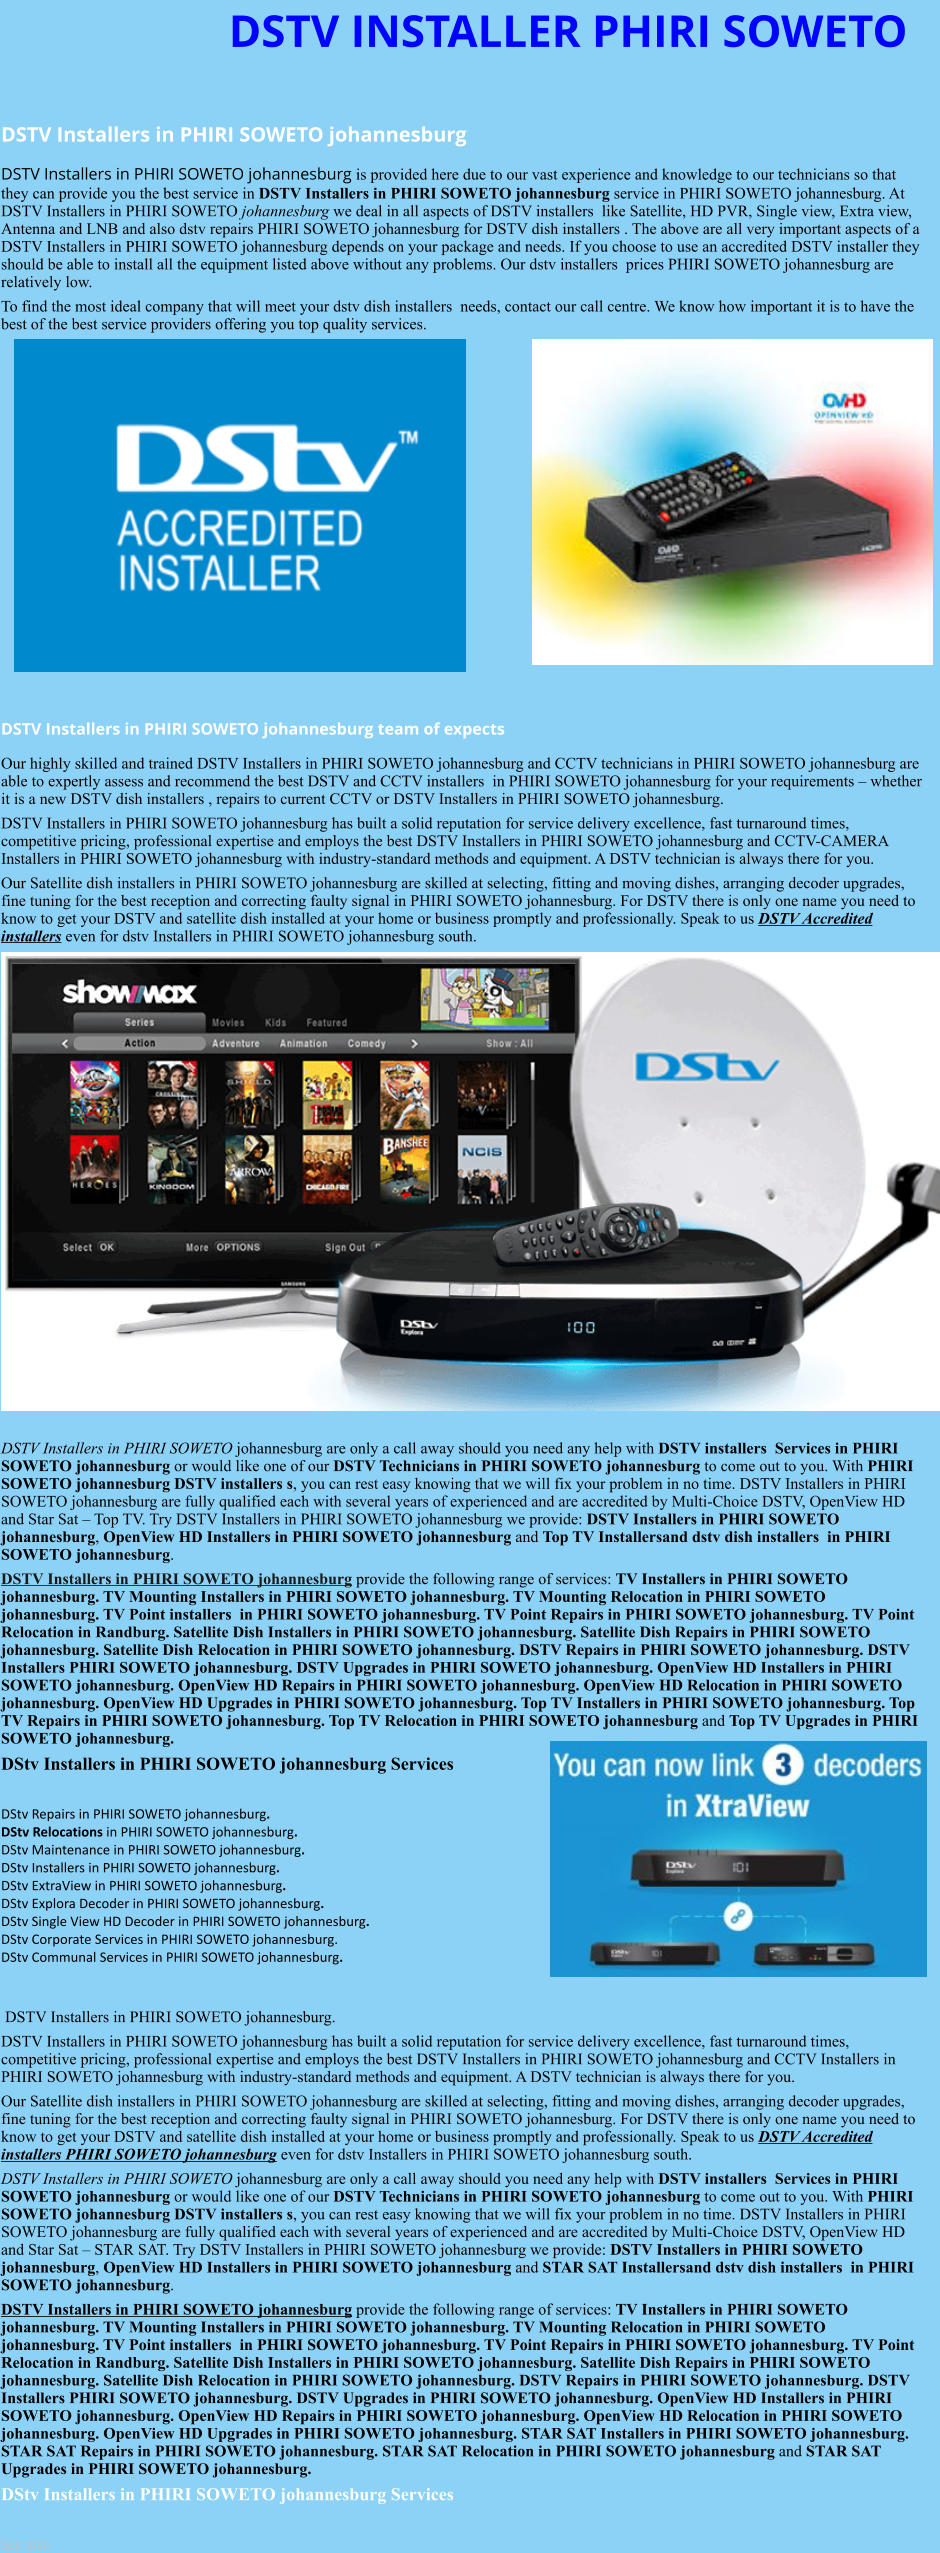 DSTV INSTALLER PHIRI SOWETO  DSTV Installers in PHIRI SOWETO johannesburg  DSTV Installers in PHIRI SOWETO johannesburg is provided here due to our vast experience and knowledge to our technicians so that they can provide you the best service in DSTV Installers in PHIRI SOWETO johannesburg service in PHIRI SOWETO johannesburg. At DSTV Installers in PHIRI SOWETO johannesburg we deal in all aspects of DSTV installers  like Satellite, HD PVR, Single view, Extra view, Antenna and LNB and also dstv repairs PHIRI SOWETO johannesburg for DSTV dish installers . The above are all very important aspects of a DSTV Installers in PHIRI SOWETO johannesburg depends on your package and needs. If you choose to use an accredited DSTV installer they should be able to install all the equipment listed above without any problems. Our dstv installers  prices PHIRI SOWETO johannesburg are relatively low. To find the most ideal company that will meet your dstv dish installers  needs, contact our call centre. We know how important it is to have the best of the best service providers offering you top quality services.                DSTV Installers in PHIRI SOWETO johannesburg team of expects Our highly skilled and trained DSTV Installers in PHIRI SOWETO johannesburg and CCTV technicians in PHIRI SOWETO johannesburg are able to expertly assess and recommend the best DSTV and CCTV installers  in PHIRI SOWETO johannesburg for your requirements – whether it is a new DSTV dish installers , repairs to current CCTV or DSTV Installers in PHIRI SOWETO johannesburg. DSTV Installers in PHIRI SOWETO johannesburg has built a solid reputation for service delivery excellence, fast turnaround times, competitive pricing, professional expertise and employs the best DSTV Installers in PHIRI SOWETO johannesburg and CCTV-CAMERA Installers in PHIRI SOWETO johannesburg with industry-standard methods and equipment. A DSTV technician is always there for you. Our Satellite dish installers in PHIRI SOWETO johannesburg are skilled at selecting, fitting and moving dishes, arranging decoder upgrades, fine tuning for the best reception and correcting faulty signal in PHIRI SOWETO johannesburg. For DSTV there is only one name you need to know to get your DSTV and satellite dish installed at your home or business promptly and professionally. Speak to us DSTV Accredited installers even for dstv Installers in PHIRI SOWETO johannesburg south.                     DSTV Installers in PHIRI SOWETO johannesburg are only a call away should you need any help with DSTV installers  Services in PHIRI SOWETO johannesburg or would like one of our DSTV Technicians in PHIRI SOWETO johannesburg to come out to you. With PHIRI SOWETO johannesburg DSTV installers s, you can rest easy knowing that we will fix your problem in no time. DSTV Installers in PHIRI SOWETO johannesburg are fully qualified each with several years of experienced and are accredited by Multi-Choice DSTV, OpenView HD and Star Sat – Top TV. Try DSTV Installers in PHIRI SOWETO johannesburg we provide: DSTV Installers in PHIRI SOWETO johannesburg, OpenView HD Installers in PHIRI SOWETO johannesburg and Top TV Installersand dstv dish installers  in PHIRI SOWETO johannesburg. DSTV Installers in PHIRI SOWETO johannesburg provide the following range of services: TV Installers in PHIRI SOWETO johannesburg. TV Mounting Installers in PHIRI SOWETO johannesburg. TV Mounting Relocation in PHIRI SOWETO johannesburg. TV Point installers  in PHIRI SOWETO johannesburg. TV Point Repairs in PHIRI SOWETO johannesburg. TV Point Relocation in Randburg. Satellite Dish Installers in PHIRI SOWETO johannesburg. Satellite Dish Repairs in PHIRI SOWETO johannesburg. Satellite Dish Relocation in PHIRI SOWETO johannesburg. DSTV Repairs in PHIRI SOWETO johannesburg. DSTV Installers PHIRI SOWETO johannesburg. DSTV Upgrades in PHIRI SOWETO johannesburg. OpenView HD Installers in PHIRI SOWETO johannesburg. OpenView HD Repairs in PHIRI SOWETO johannesburg. OpenView HD Relocation in PHIRI SOWETO johannesburg. OpenView HD Upgrades in PHIRI SOWETO johannesburg. Top TV Installers in PHIRI SOWETO johannesburg. Top TV Repairs in PHIRI SOWETO johannesburg. Top TV Relocation in PHIRI SOWETO johannesburg and Top TV Upgrades in PHIRI SOWETO johannesburg. DStv Installers in PHIRI SOWETO johannesburg Services  DStv Repairs in PHIRI SOWETO johannesburg.  DStv Relocations in PHIRI SOWETO johannesburg.  DStv Maintenance in PHIRI SOWETO johannesburg. DStv Installers in PHIRI SOWETO johannesburg. DStv ExtraView in PHIRI SOWETO johannesburg. DStv Explora Decoder in PHIRI SOWETO johannesburg. DStv Single View HD Decoder in PHIRI SOWETO johannesburg. DStv Corporate Services in PHIRI SOWETO johannesburg. DStv Communal Services in PHIRI SOWETO johannesburg.    DSTV Installers in PHIRI SOWETO johannesburg. DSTV Installers in PHIRI SOWETO johannesburg has built a solid reputation for service delivery excellence, fast turnaround times, competitive pricing, professional expertise and employs the best DSTV Installers in PHIRI SOWETO johannesburg and CCTV Installers in PHIRI SOWETO johannesburg with industry-standard methods and equipment. A DSTV technician is always there for you. Our Satellite dish installers in PHIRI SOWETO johannesburg are skilled at selecting, fitting and moving dishes, arranging decoder upgrades, fine tuning for the best reception and correcting faulty signal in PHIRI SOWETO johannesburg. For DSTV there is only one name you need to know to get your DSTV and satellite dish installed at your home or business promptly and professionally. Speak to us DSTV Accredited installers PHIRI SOWETO johannesburg even for dstv Installers in PHIRI SOWETO johannesburg south. DSTV Installers in PHIRI SOWETO johannesburg are only a call away should you need any help with DSTV installers  Services in PHIRI SOWETO johannesburg or would like one of our DSTV Technicians in PHIRI SOWETO johannesburg to come out to you. With PHIRI SOWETO johannesburg DSTV installers s, you can rest easy knowing that we will fix your problem in no time. DSTV Installers in PHIRI SOWETO johannesburg are fully qualified each with several years of experienced and are accredited by Multi-Choice DSTV, OpenView HD and Star Sat – STAR SAT. Try DSTV Installers in PHIRI SOWETO johannesburg we provide: DSTV Installers in PHIRI SOWETO johannesburg, OpenView HD Installers in PHIRI SOWETO johannesburg and STAR SAT Installersand dstv dish installers  in PHIRI SOWETO johannesburg. DSTV Installers in PHIRI SOWETO johannesburg provide the following range of services: TV Installers in PHIRI SOWETO johannesburg. TV Mounting Installers in PHIRI SOWETO johannesburg. TV Mounting Relocation in PHIRI SOWETO johannesburg. TV Point installers  in PHIRI SOWETO johannesburg. TV Point Repairs in PHIRI SOWETO johannesburg. TV Point Relocation in Randburg. Satellite Dish Installers in PHIRI SOWETO johannesburg. Satellite Dish Repairs in PHIRI SOWETO johannesburg. Satellite Dish Relocation in PHIRI SOWETO johannesburg. DSTV Repairs in PHIRI SOWETO johannesburg. DSTV Installers PHIRI SOWETO johannesburg. DSTV Upgrades in PHIRI SOWETO johannesburg. OpenView HD Installers in PHIRI SOWETO johannesburg. OpenView HD Repairs in PHIRI SOWETO johannesburg. OpenView HD Relocation in PHIRI SOWETO johannesburg. OpenView HD Upgrades in PHIRI SOWETO johannesburg. STAR SAT Installers in PHIRI SOWETO johannesburg. STAR SAT Repairs in PHIRI SOWETO johannesburg. STAR SAT Relocation in PHIRI SOWETO johannesburg and STAR SAT Upgrades in PHIRI SOWETO johannesburg. DStv Installers in PHIRI SOWETO johannesburg Services  See also